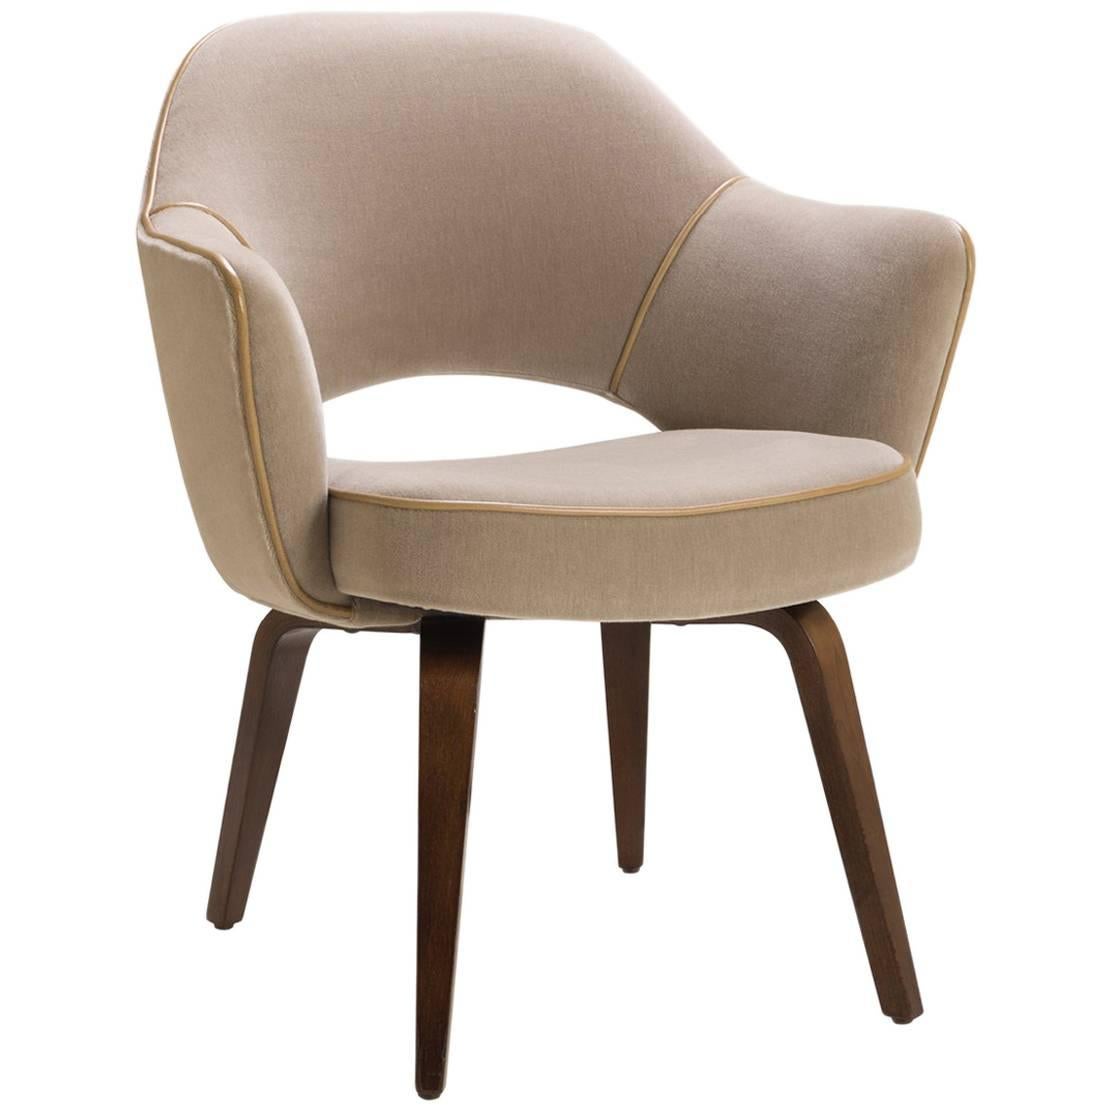 Saarinen Executive Armchair with Walnut Legs in Mohair and Leather Piping